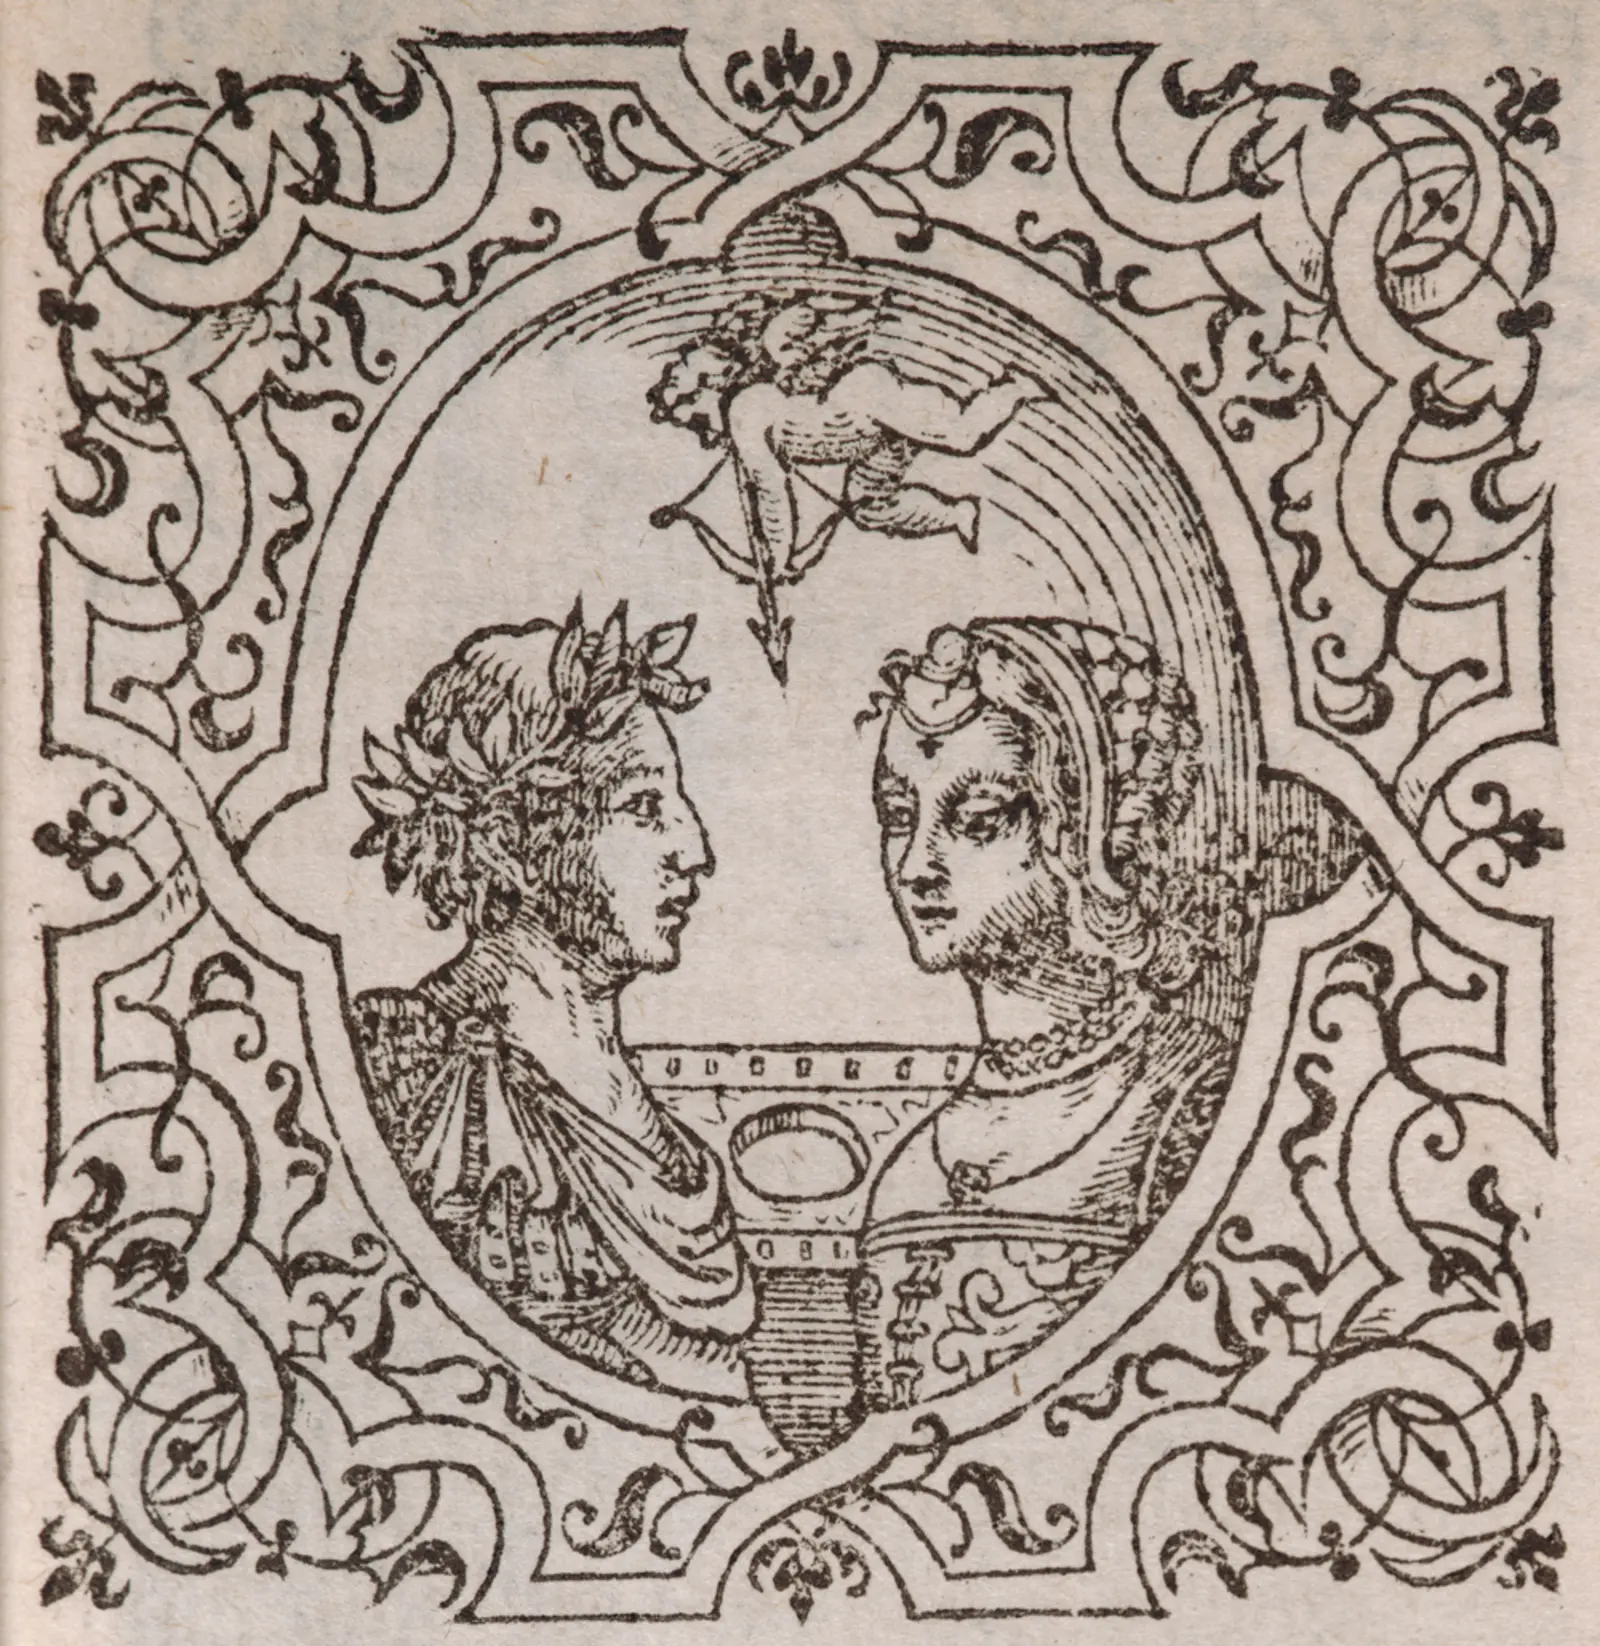 A woodcut print on a book page, depicting two people and Cupid surrounded by an ornate border.